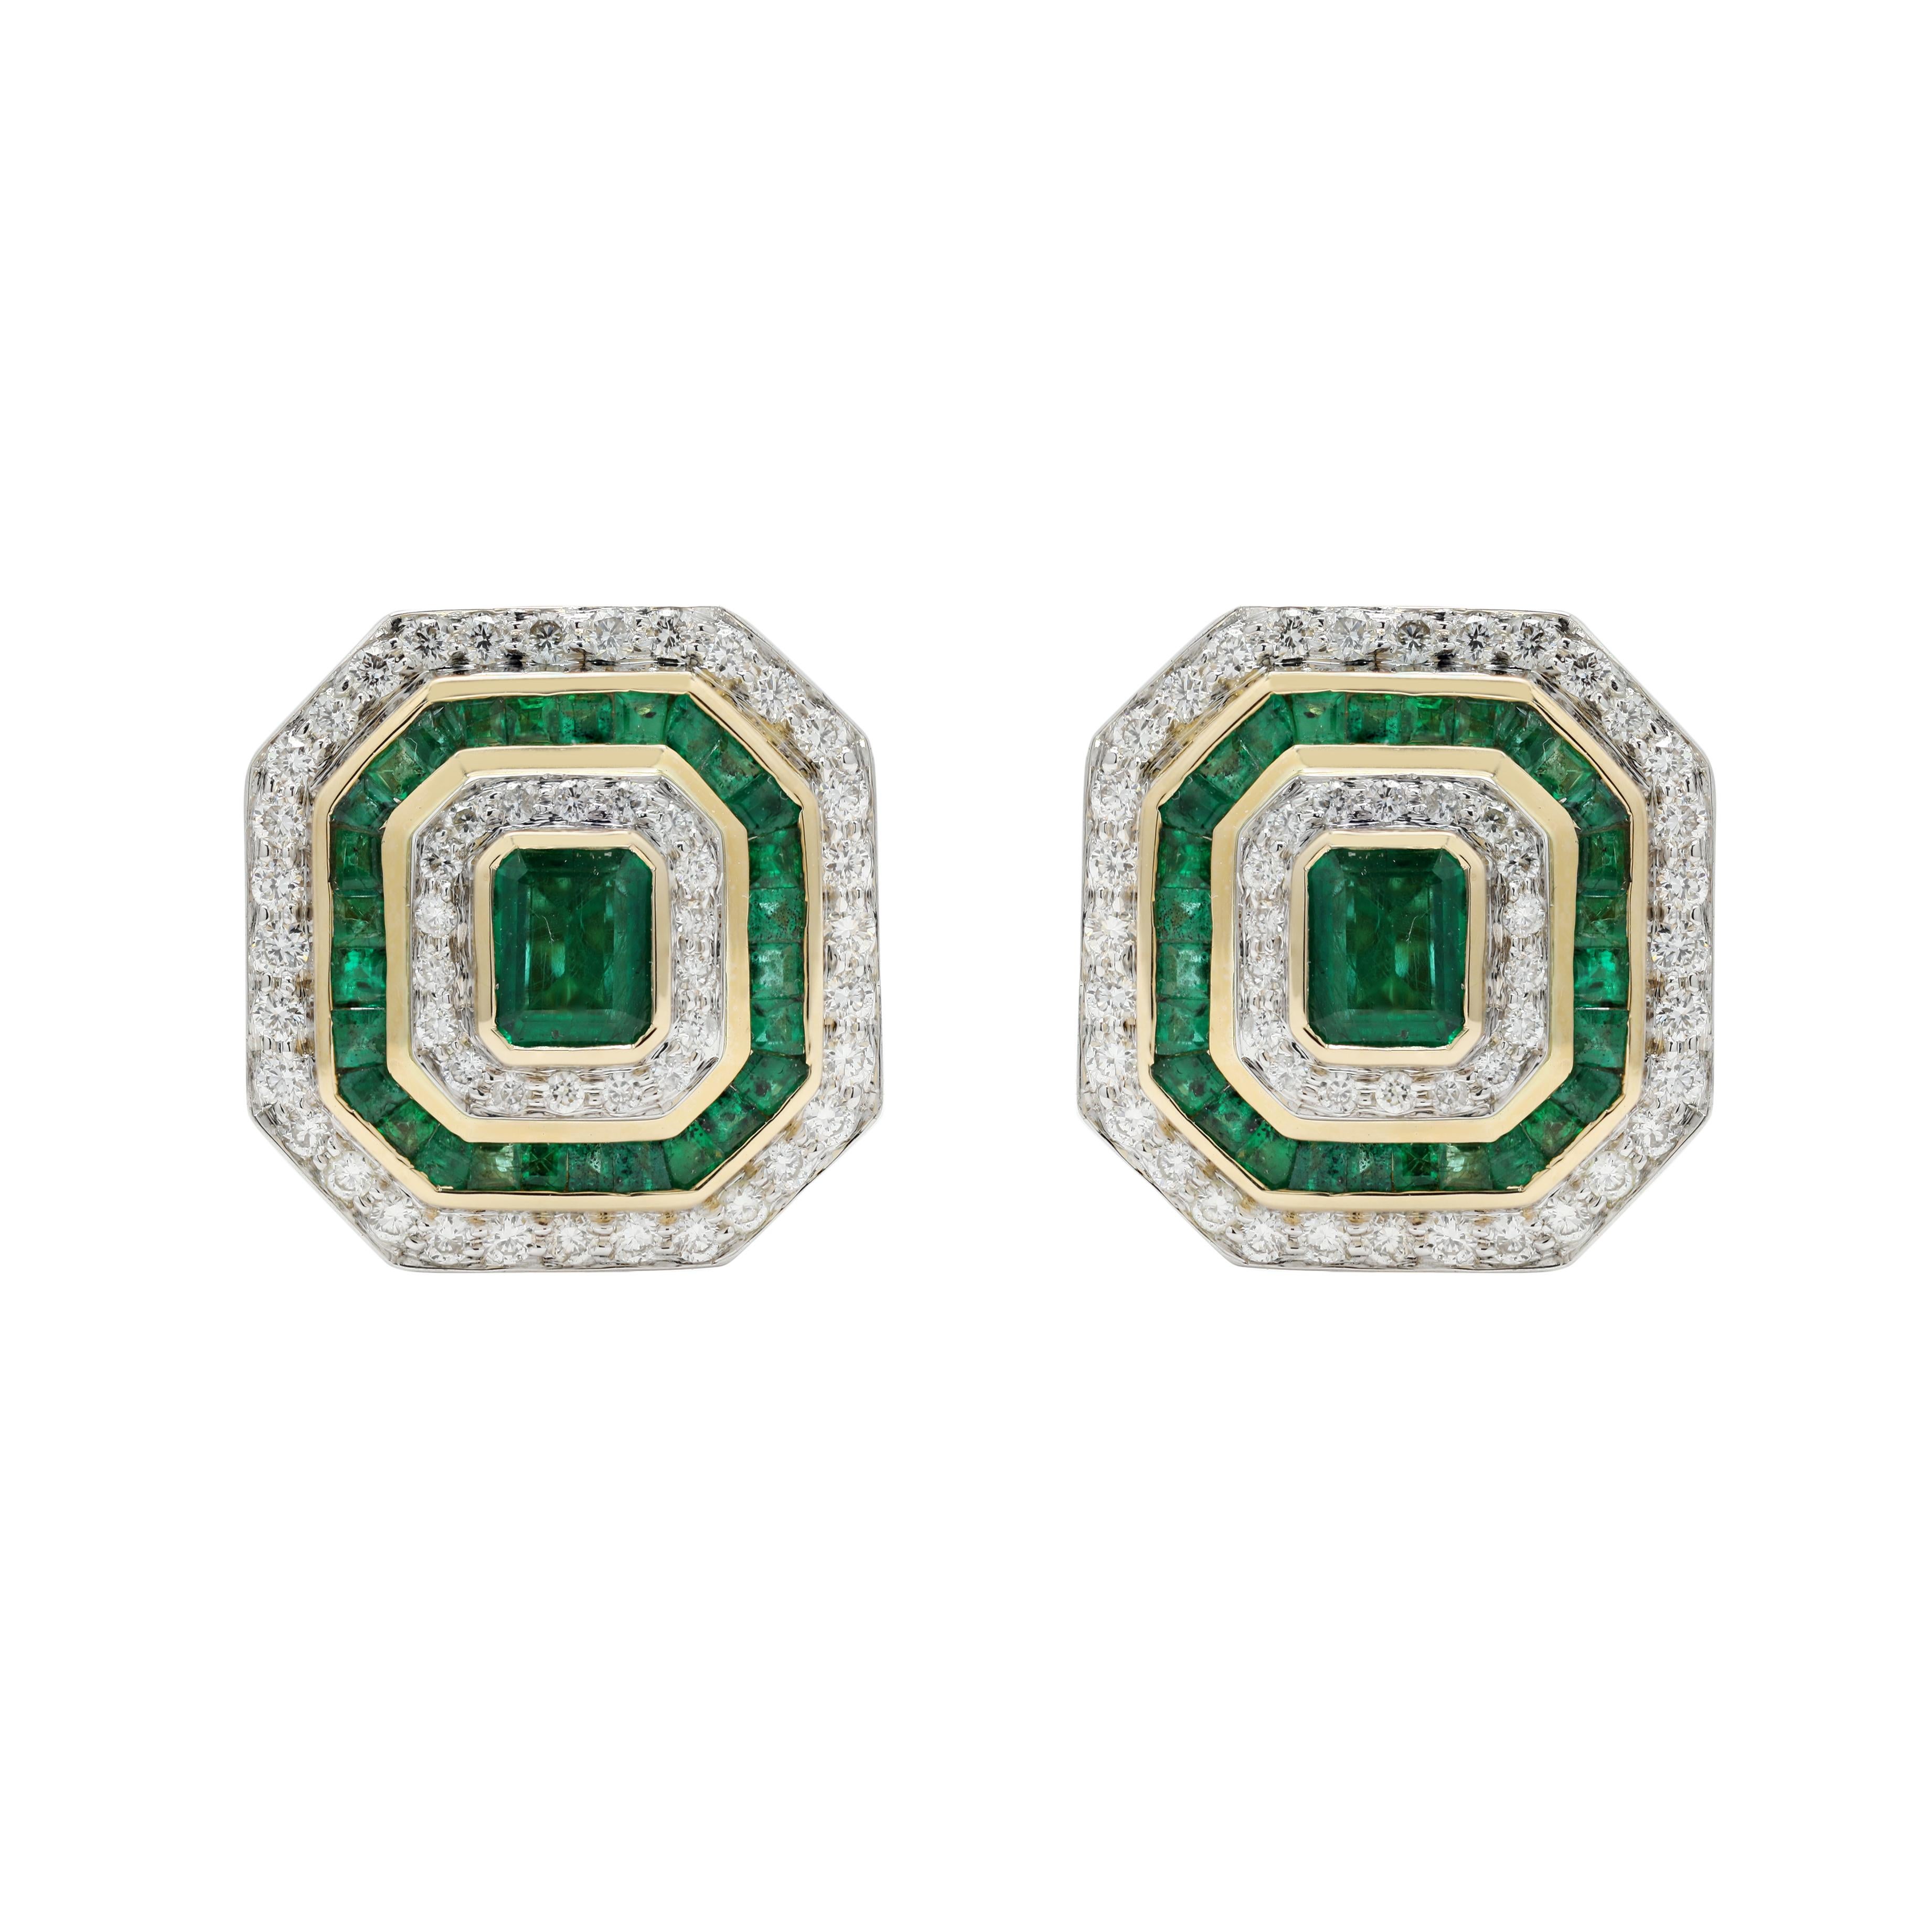 Earrings create a subtle beauty while showcasing the colors of the natural precious gemstones and illuminating diamonds making a statement.

Octagon and square cut Emerald and Diamond Stud earrings in 18K gold. Embrace your look with these stunning